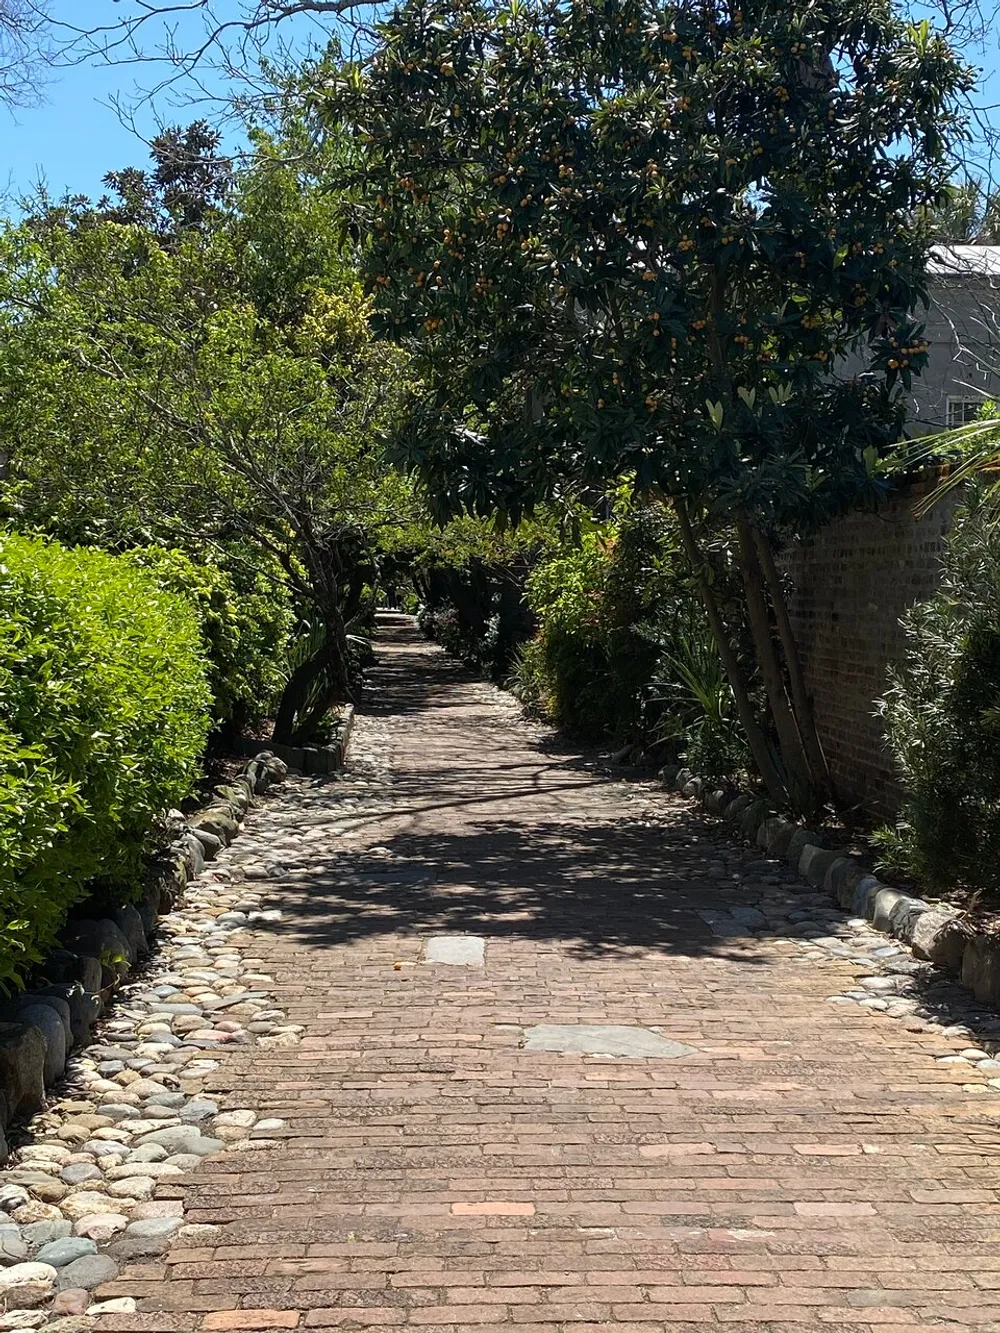 An inviting brick pathway is lined with cobblestones and flanked by lush greenery under a bright blue sky